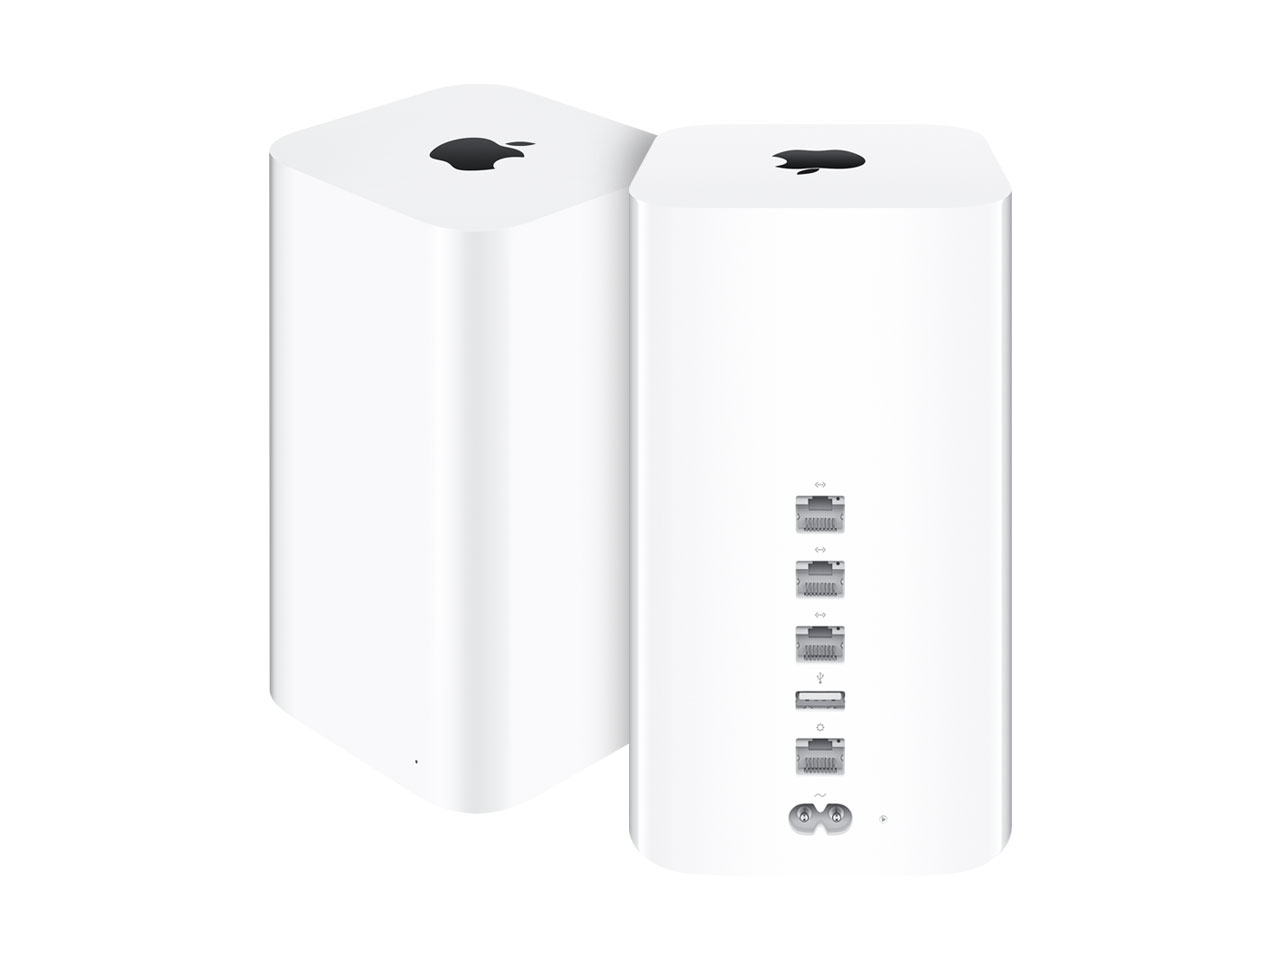 best buy apple airport extreme base station